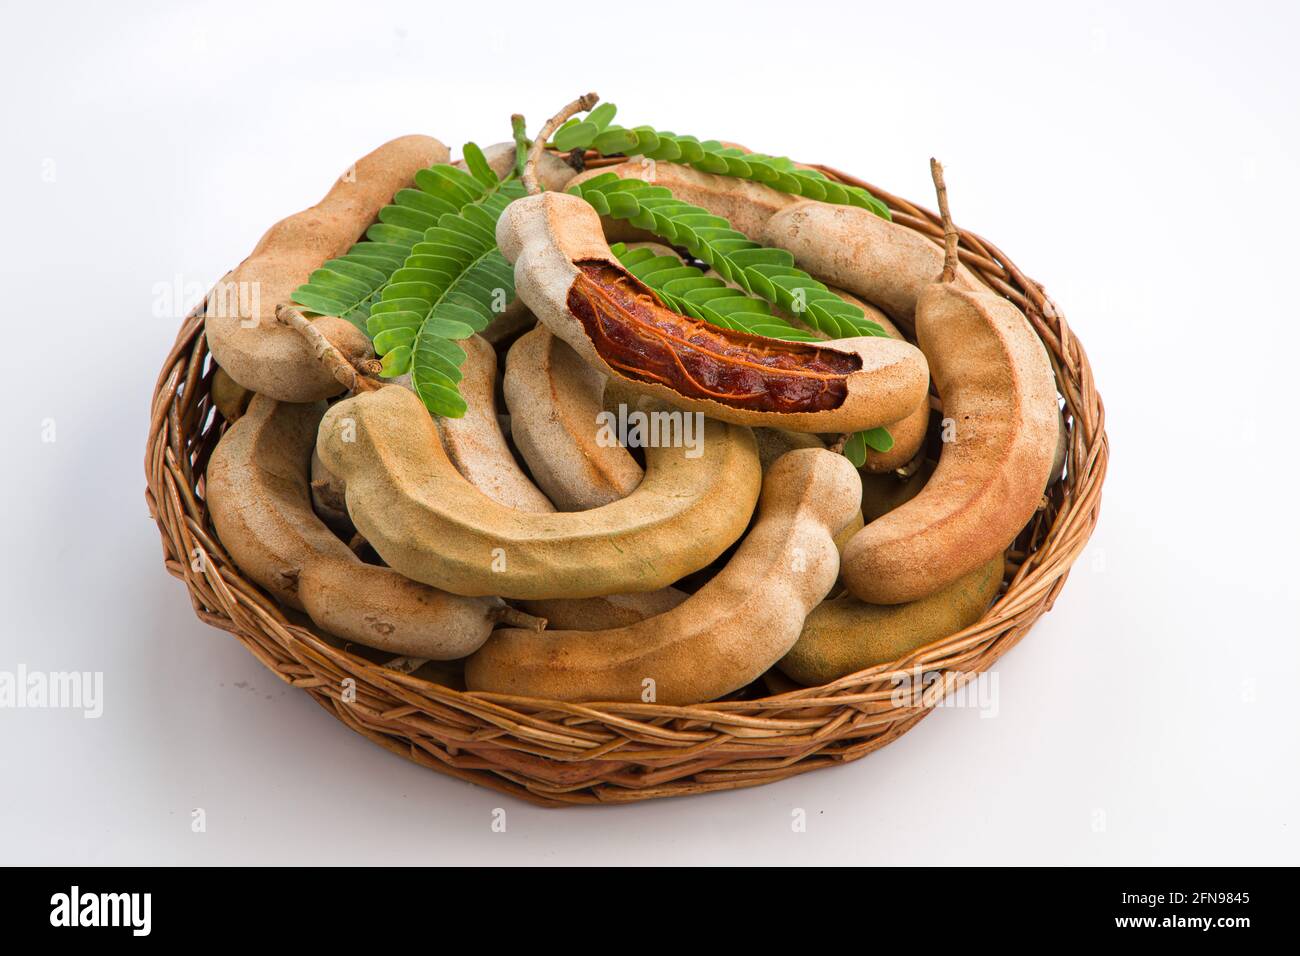 Tamarind  bean like pods filled with seeds surrounded by a fibrous pulp arranged in a basket with white textured background. Stock Photo